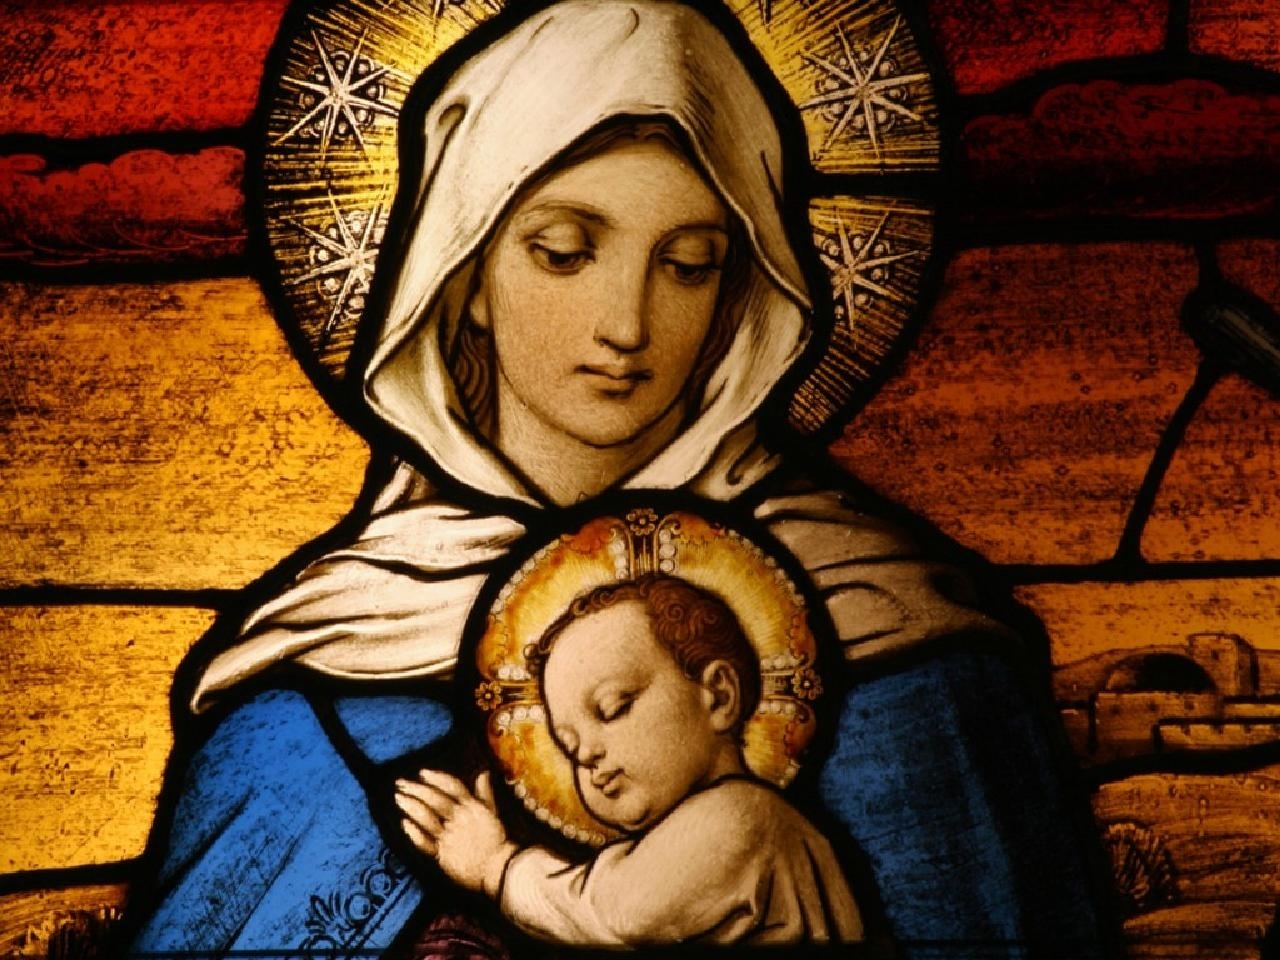 mother mary with baby jesus christ wallpaper picture download